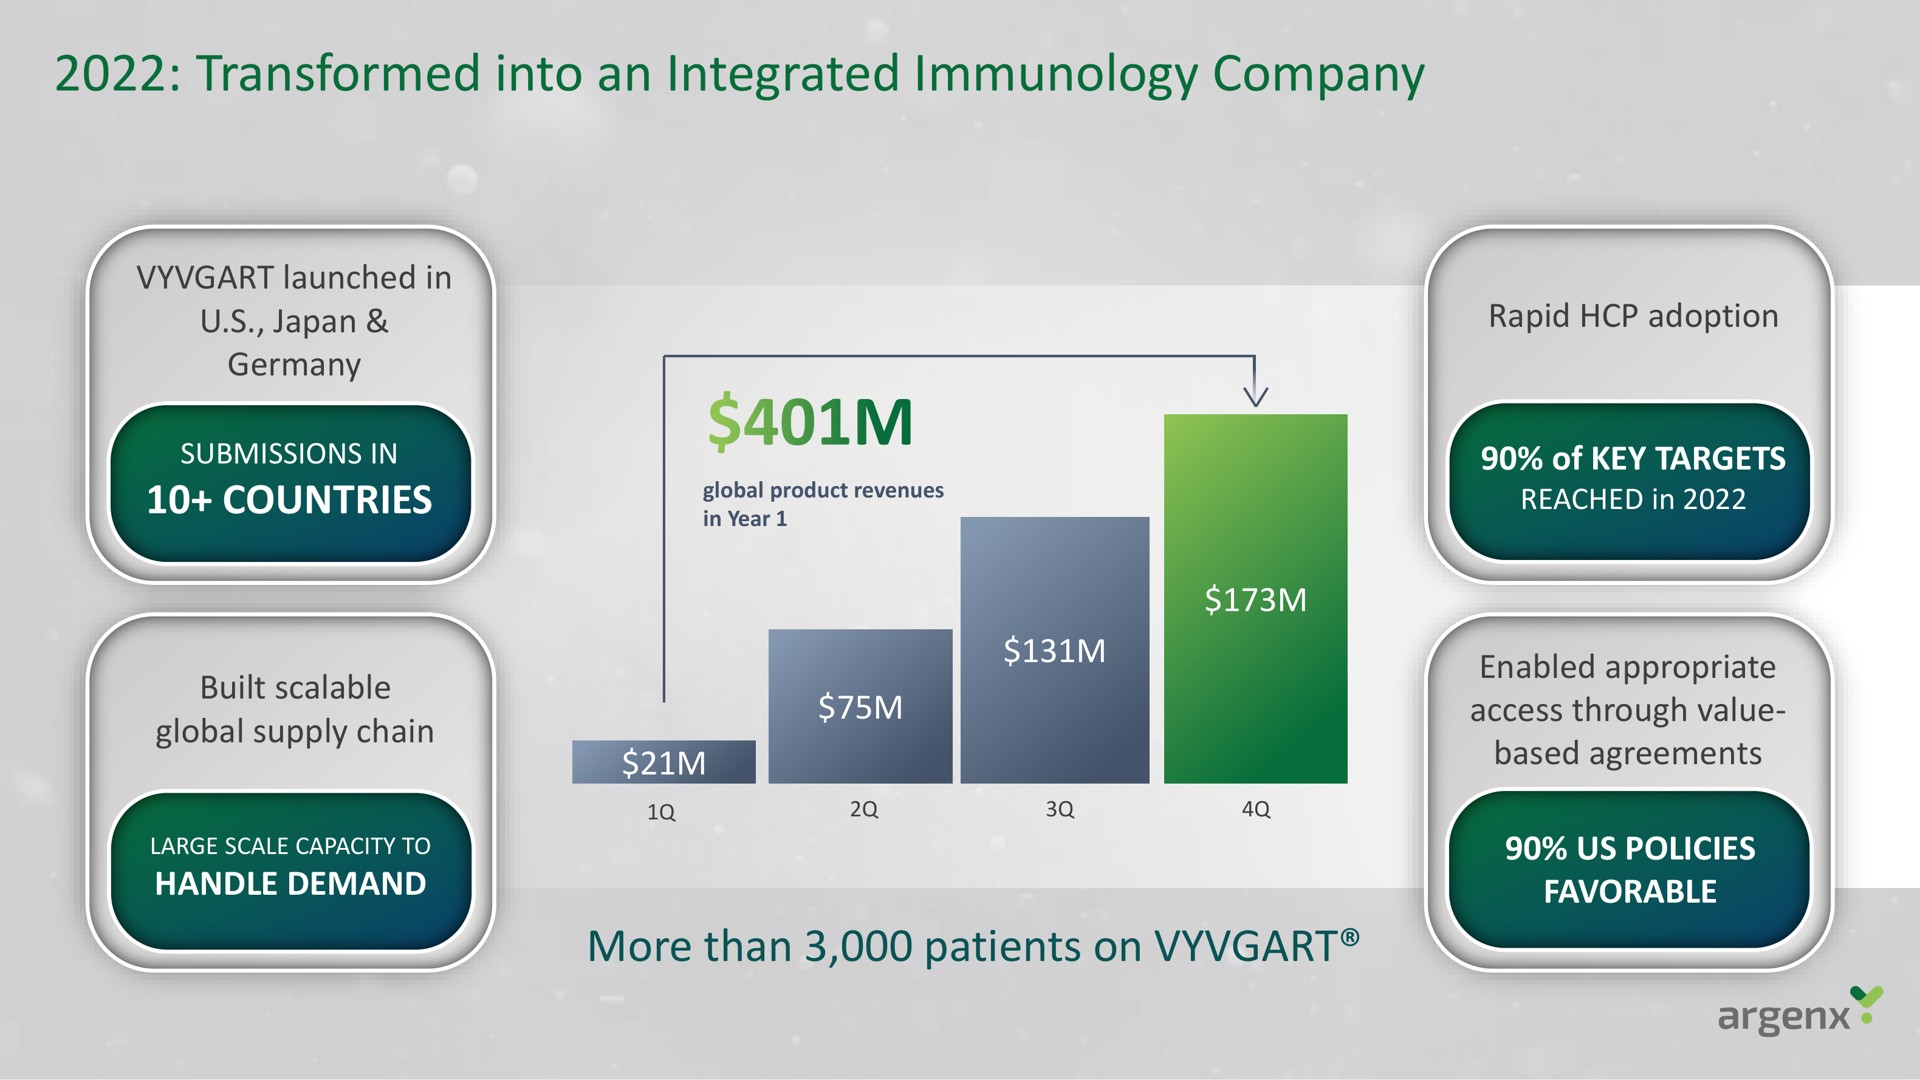 transformed into an integrated immunology company | argenx SE